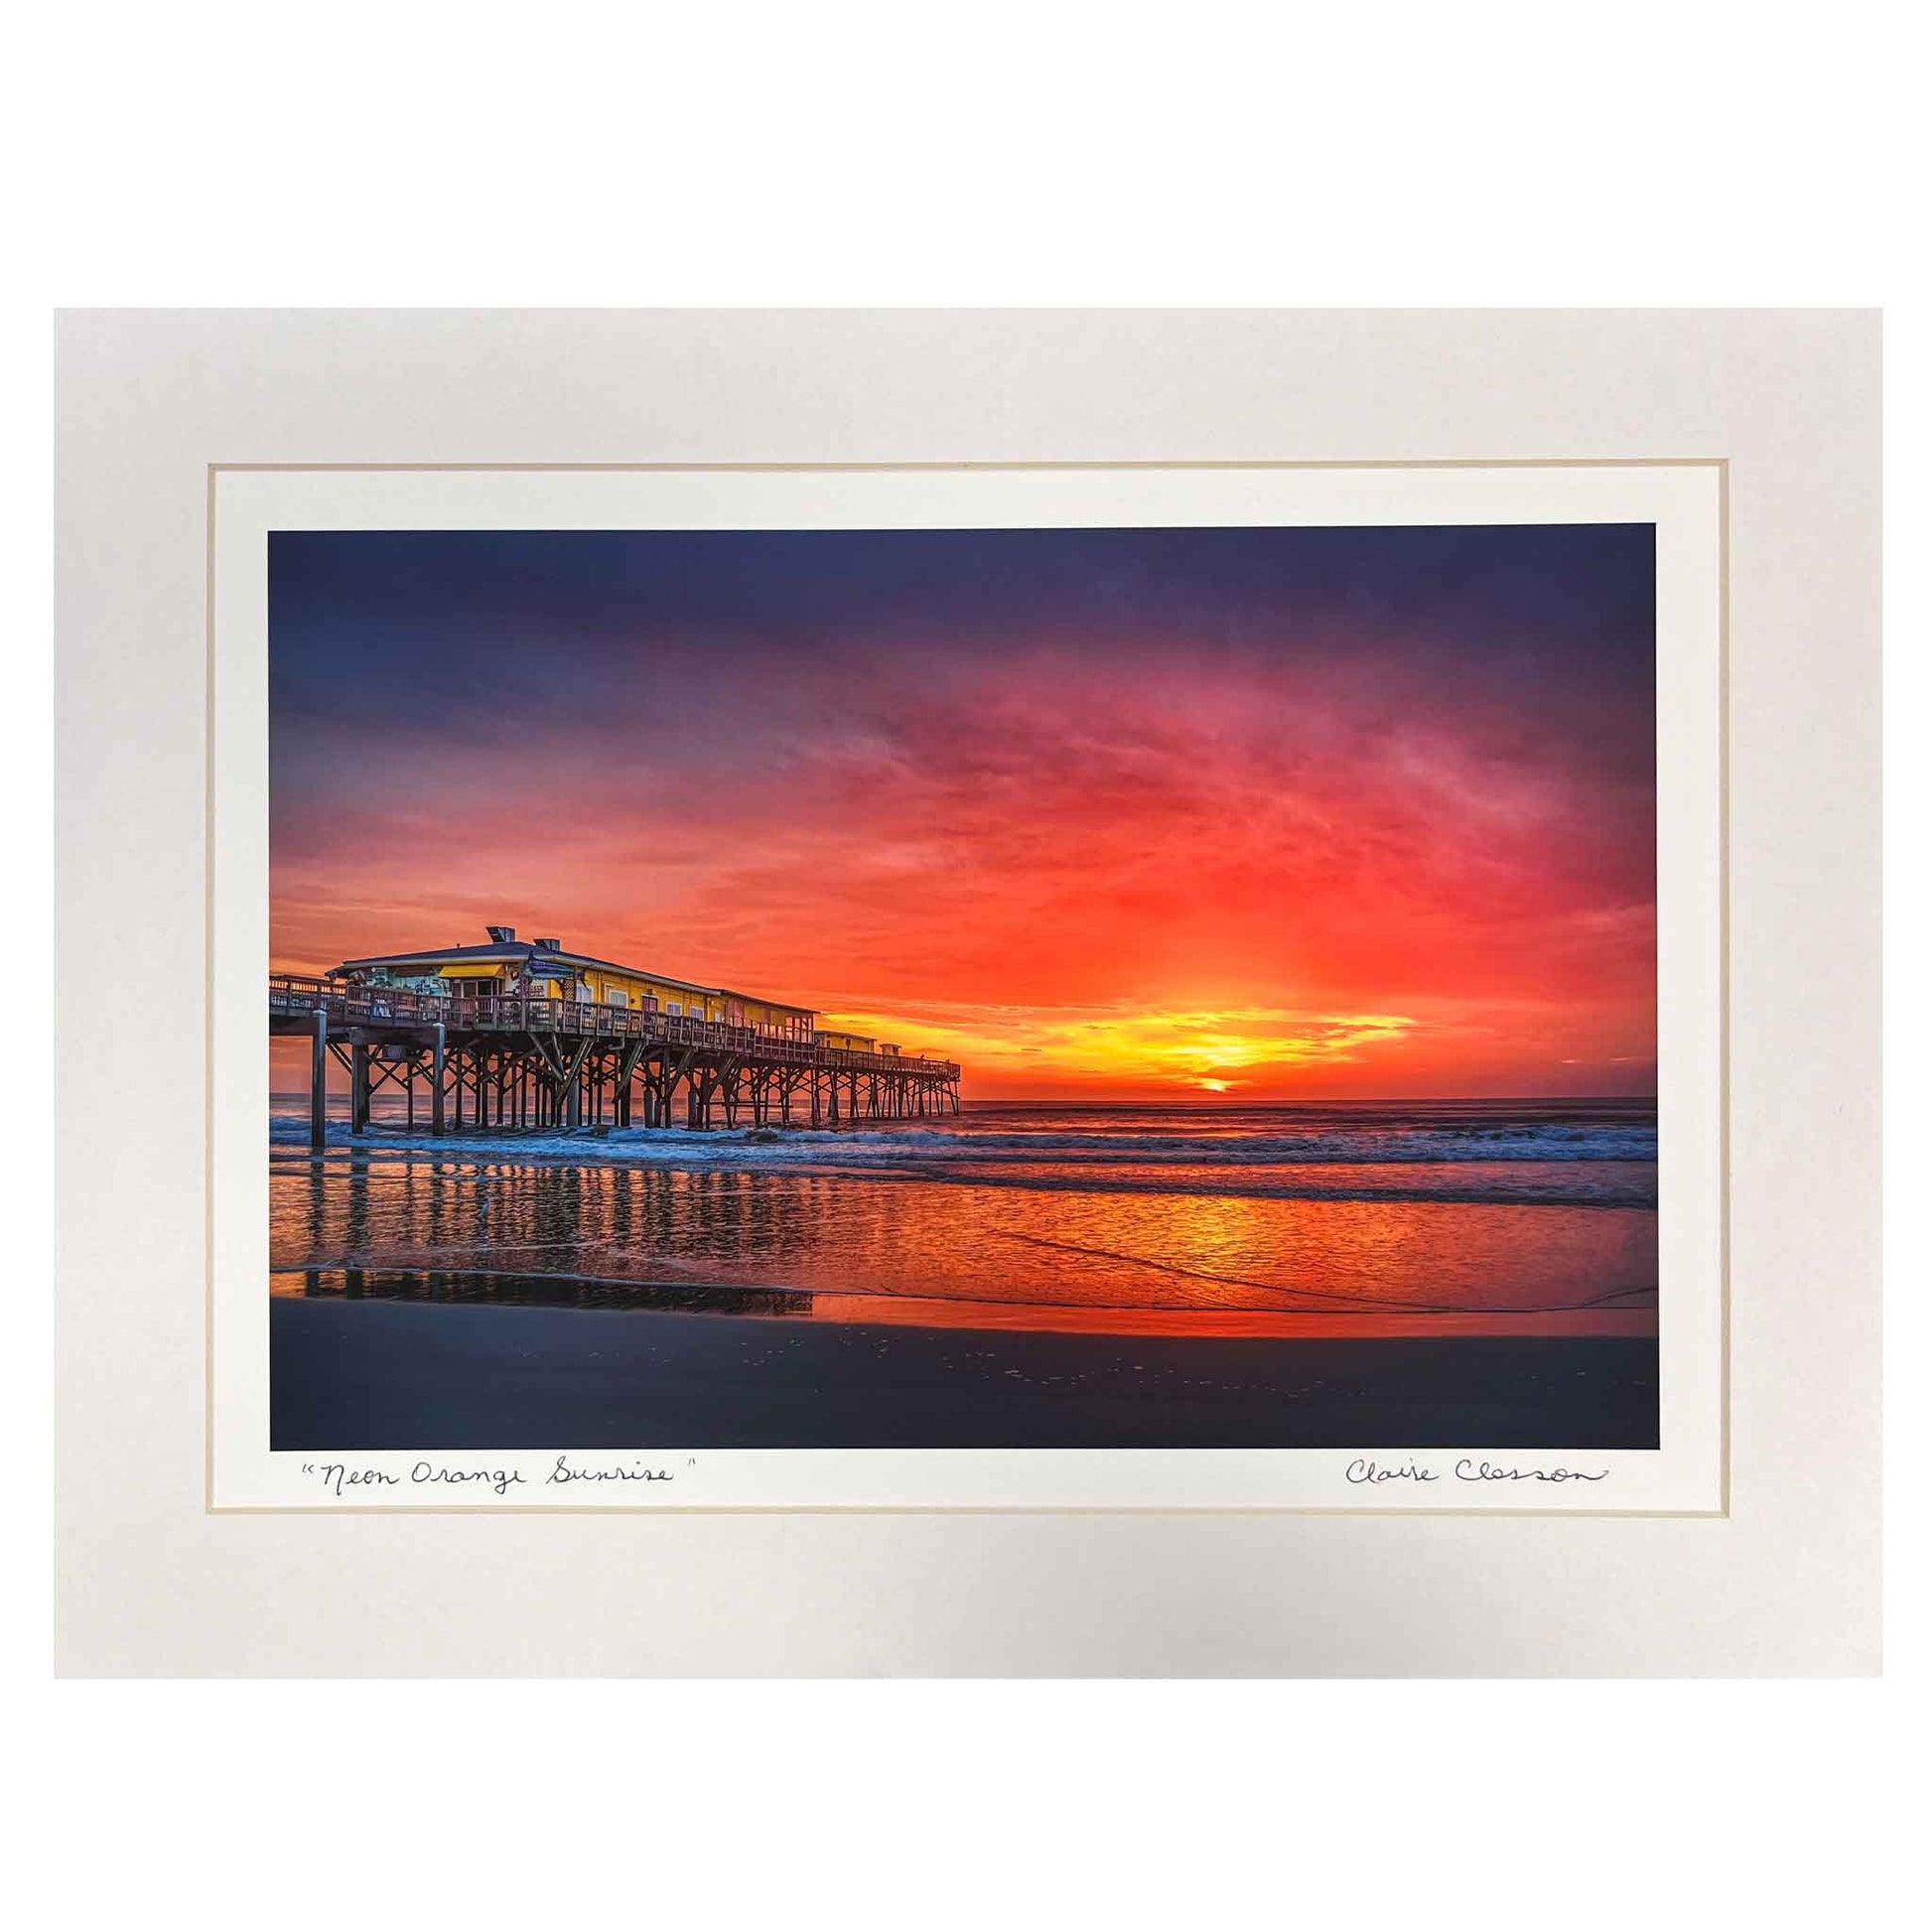 ECC “Neon Orange Sunrise” Matted Print by Photographer Claire Closson. Famed Crabby Joe's Seafood on the Sunglow Pier in Daytona Beach Shores, Florida. Neon orange , brilliant yellows and purple skies are reflected in the ocean. A beautiful photorgaph for any home. 12 x 16 matted and ready to be framed.